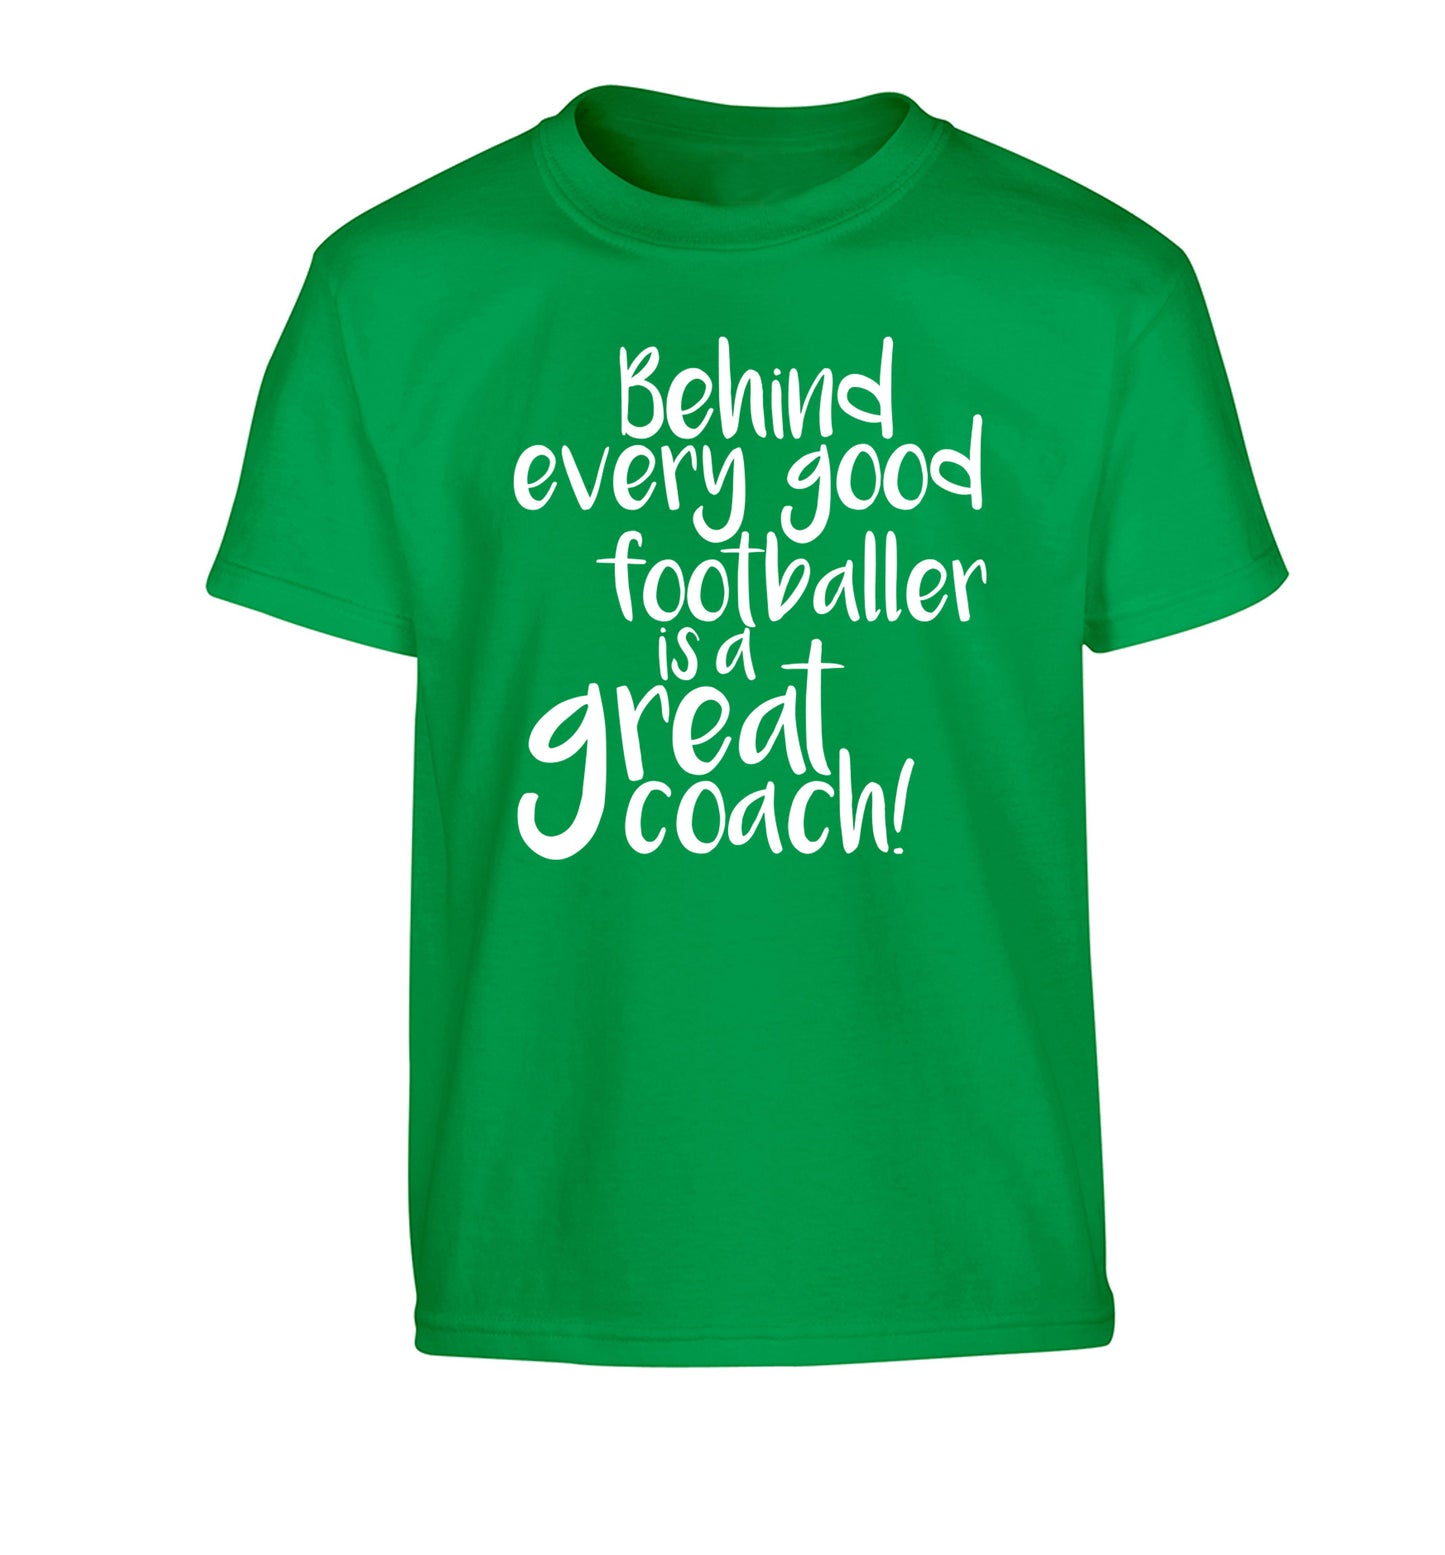 Behind every good footballer is a great coach! Children's green Tshirt 12-14 Years